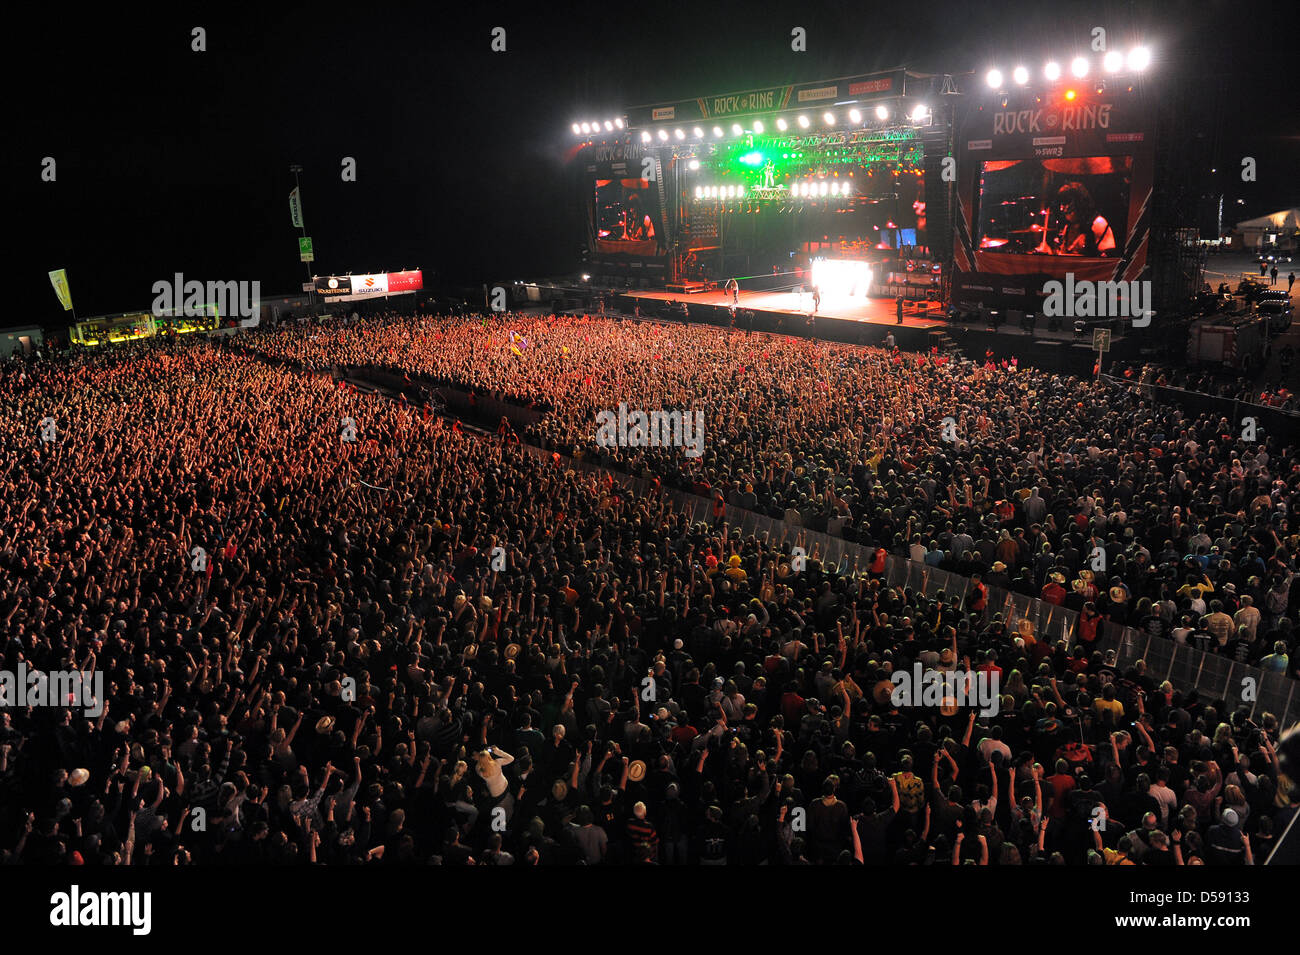 Rock am Ring festival given green light after security checks | Louder